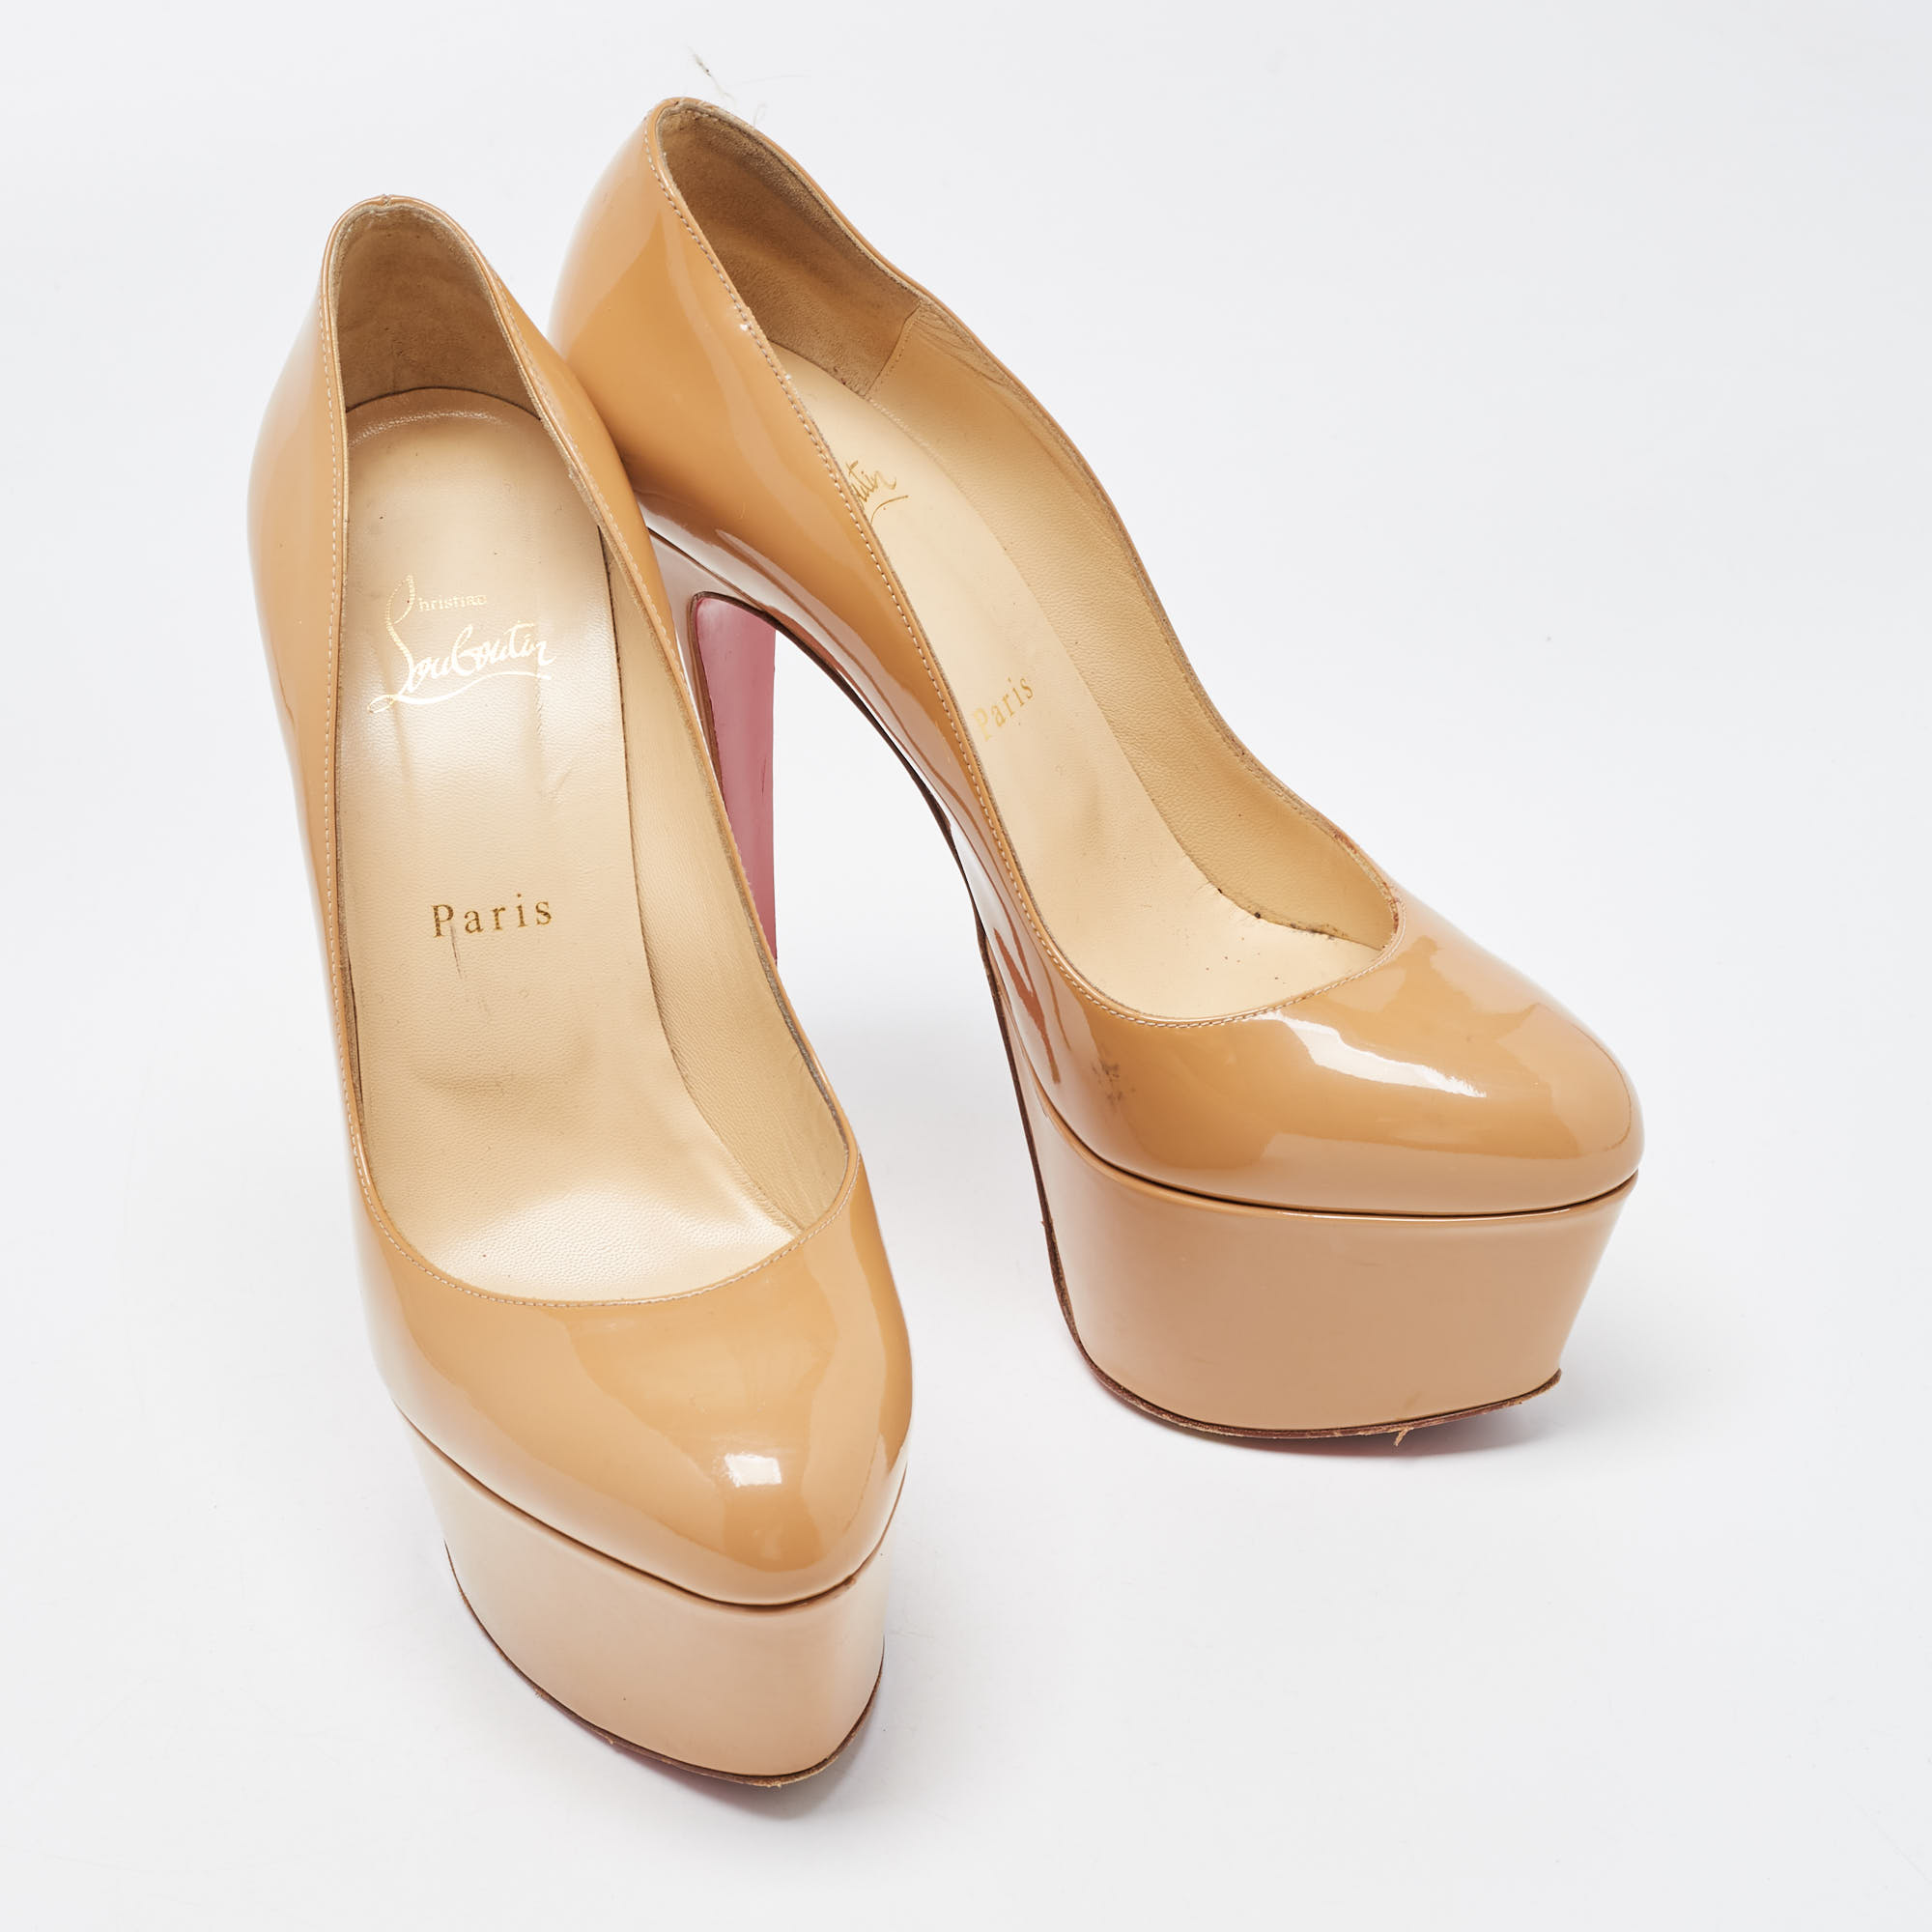 Christian Louboutin Beige Patent Leather Victoria Pumps Size 40